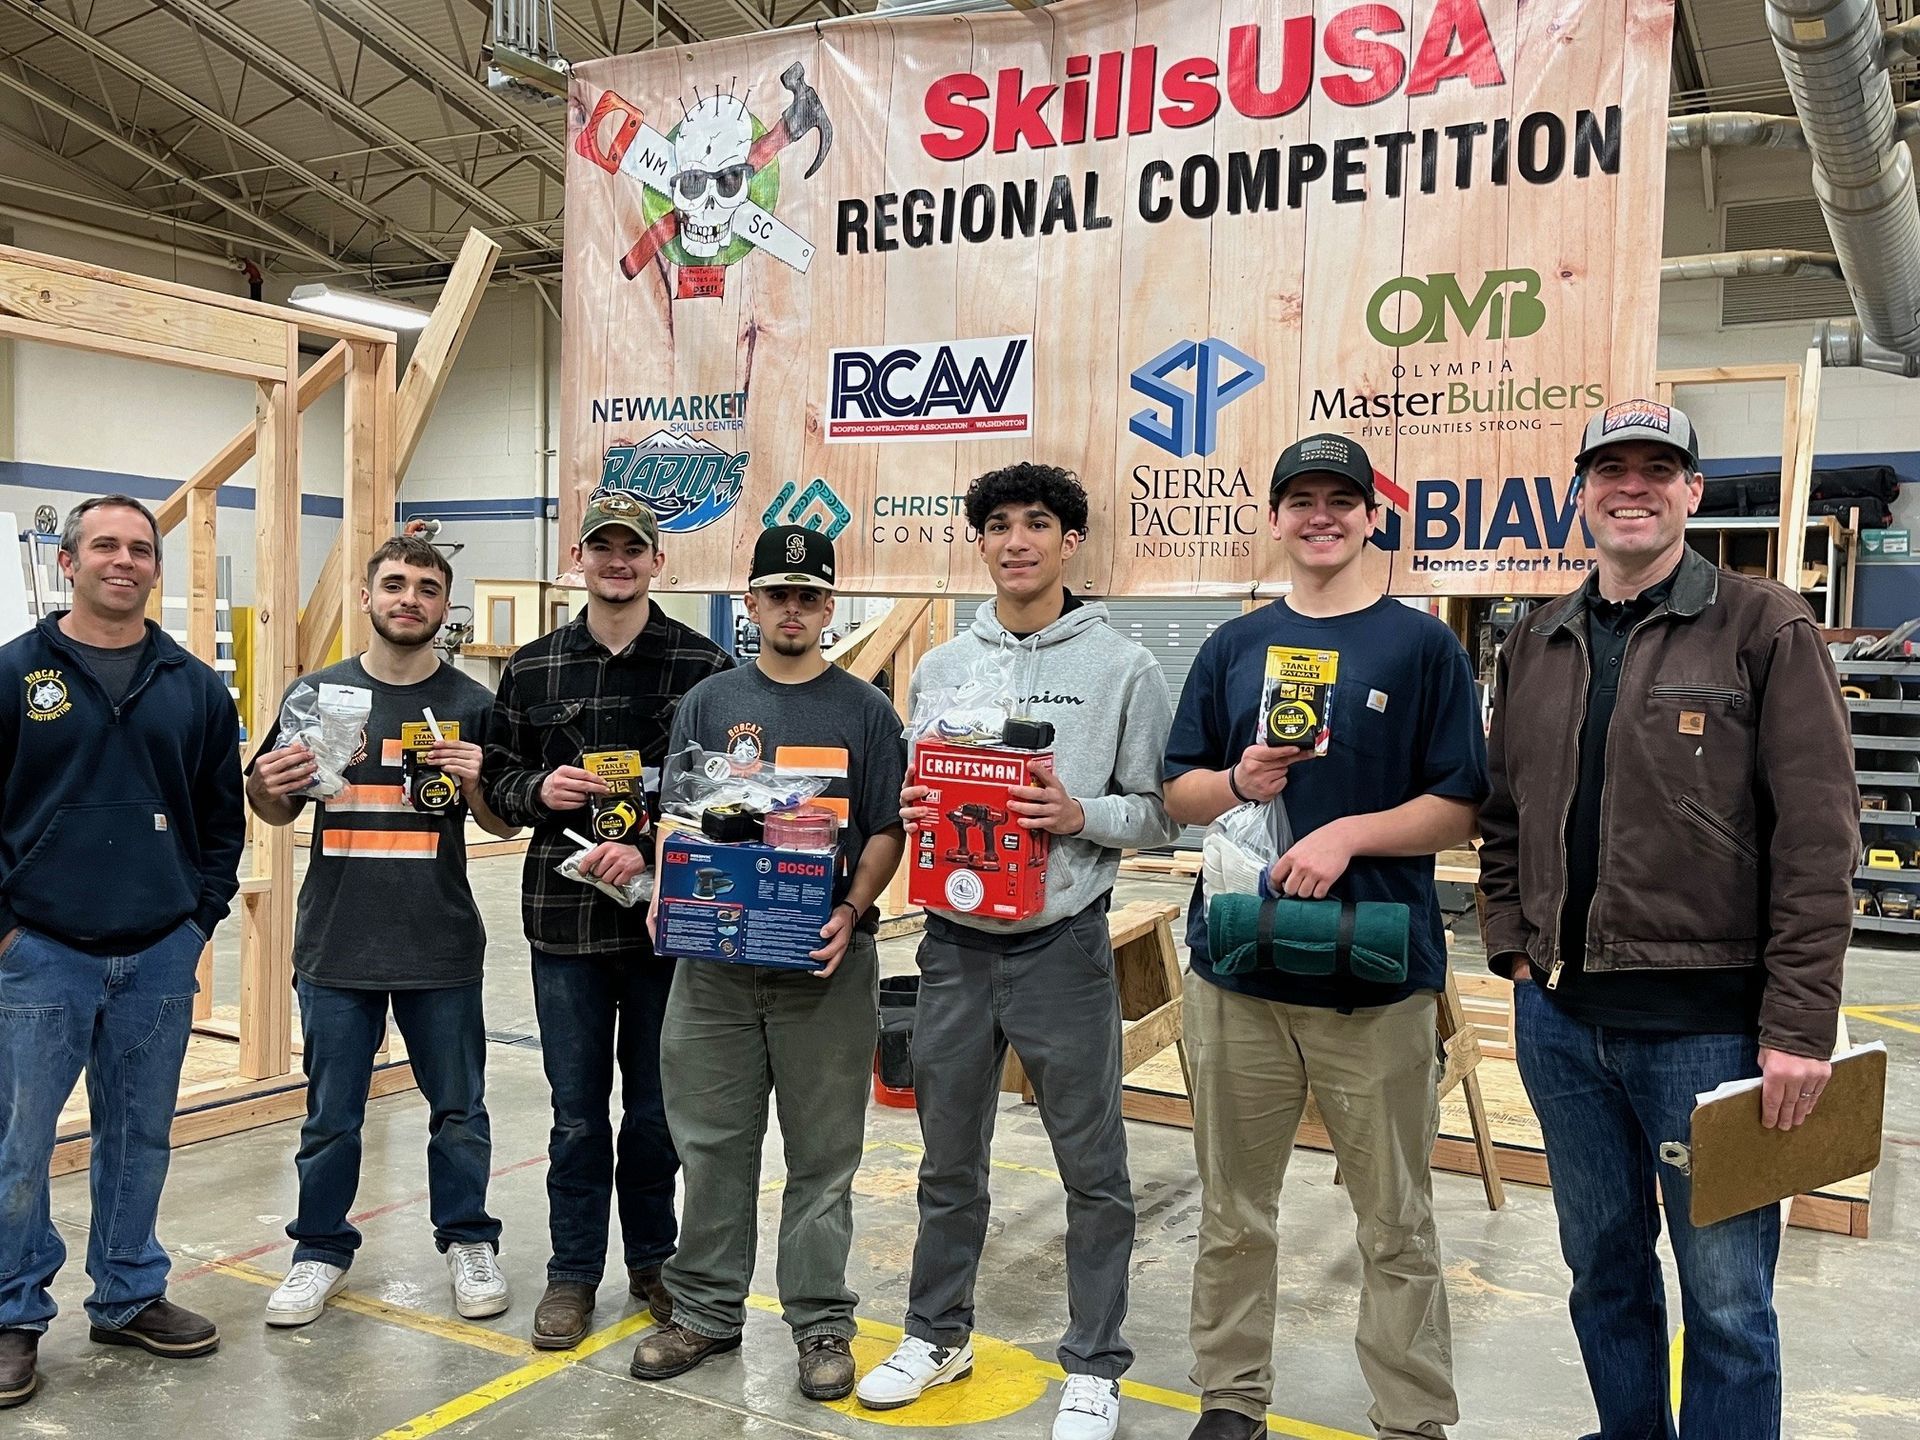 a group of men are standing in front of a sign that says skills usa regional competition .